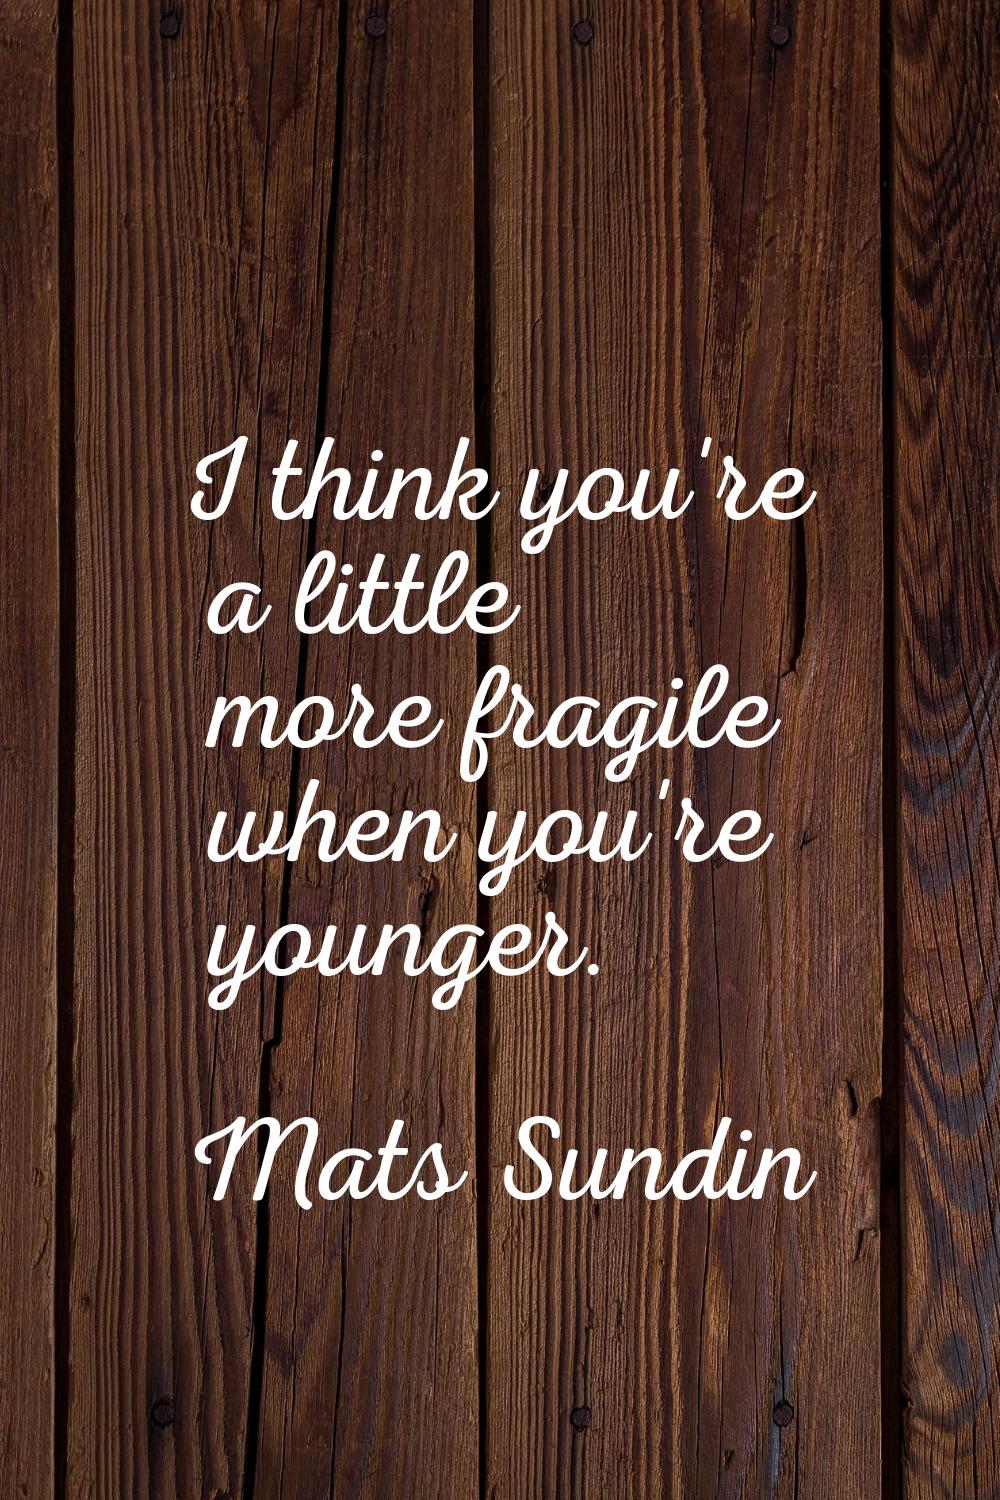 I think you're a little more fragile when you're younger.